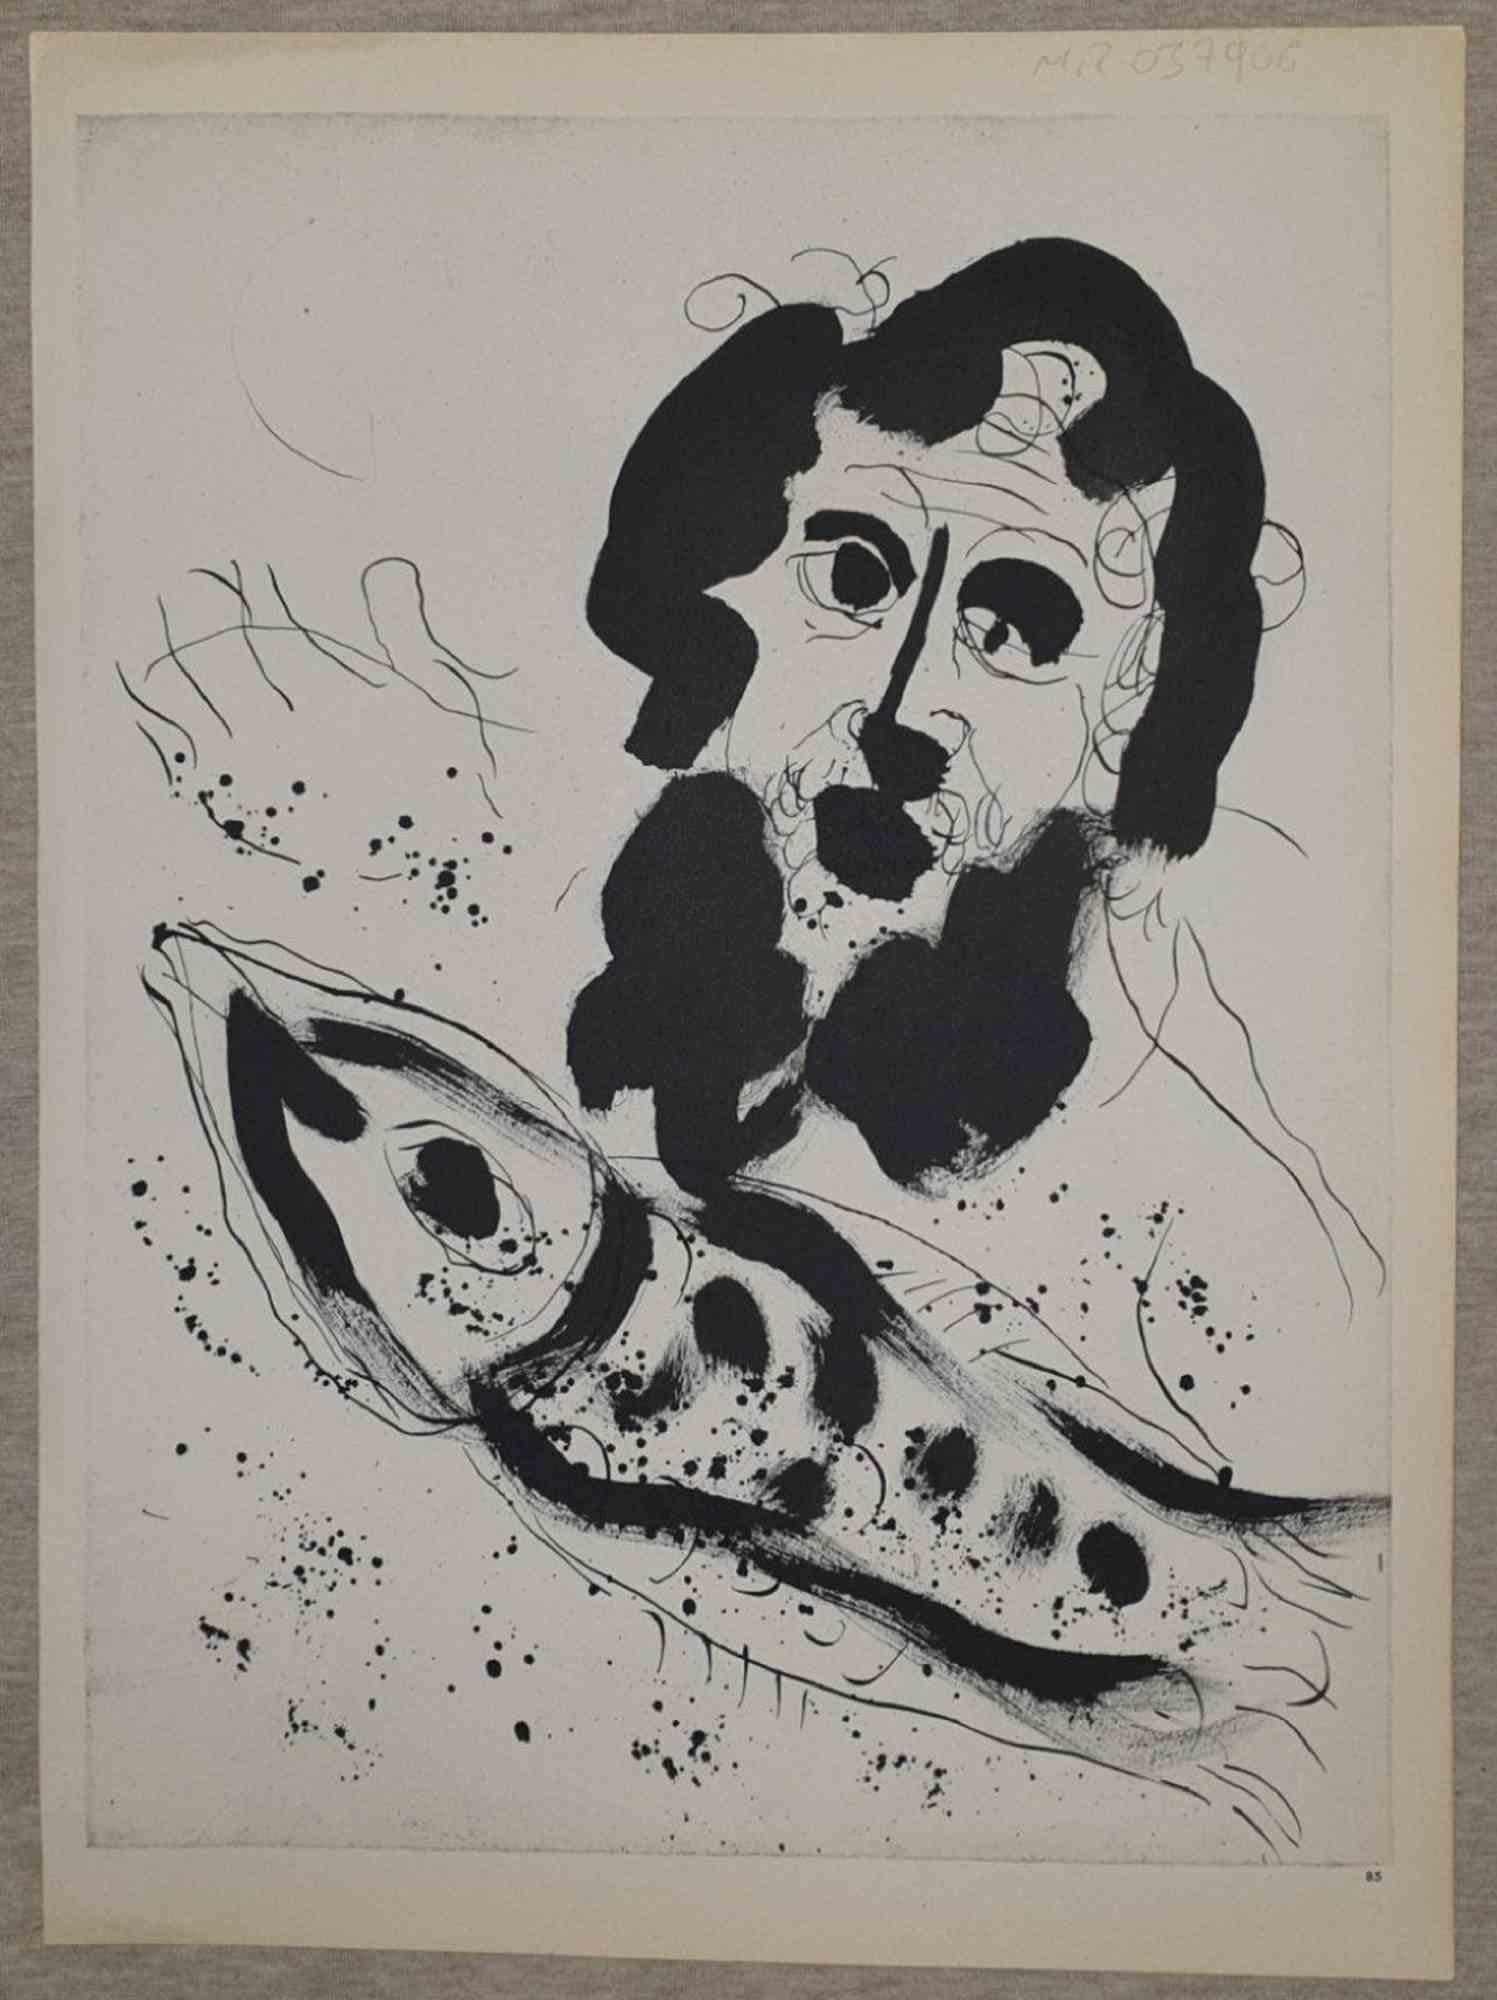  Jonas - Lithograph by Marc Chagall - 1960s 1